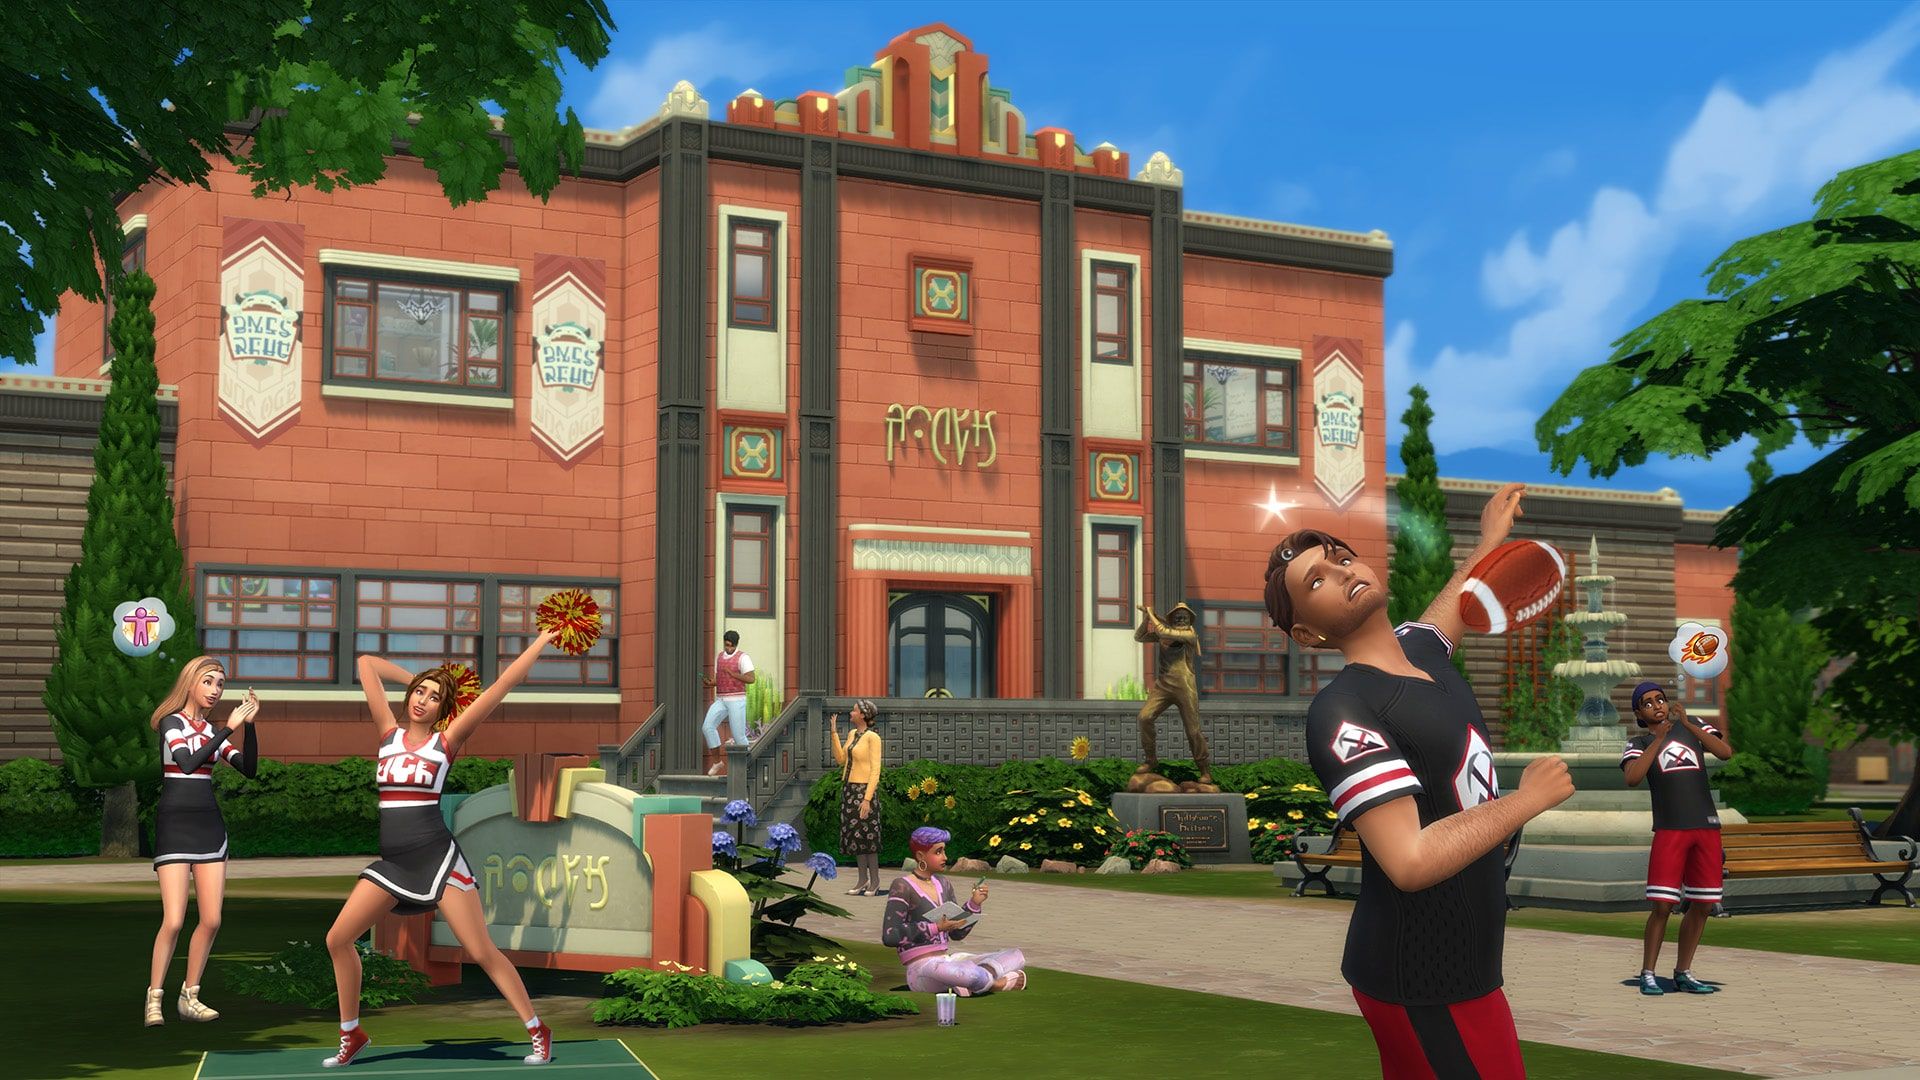 Hd Porn Videos School Girls Jungal Picnic - Sims 4 High School Years review - is the new pack worth buying?